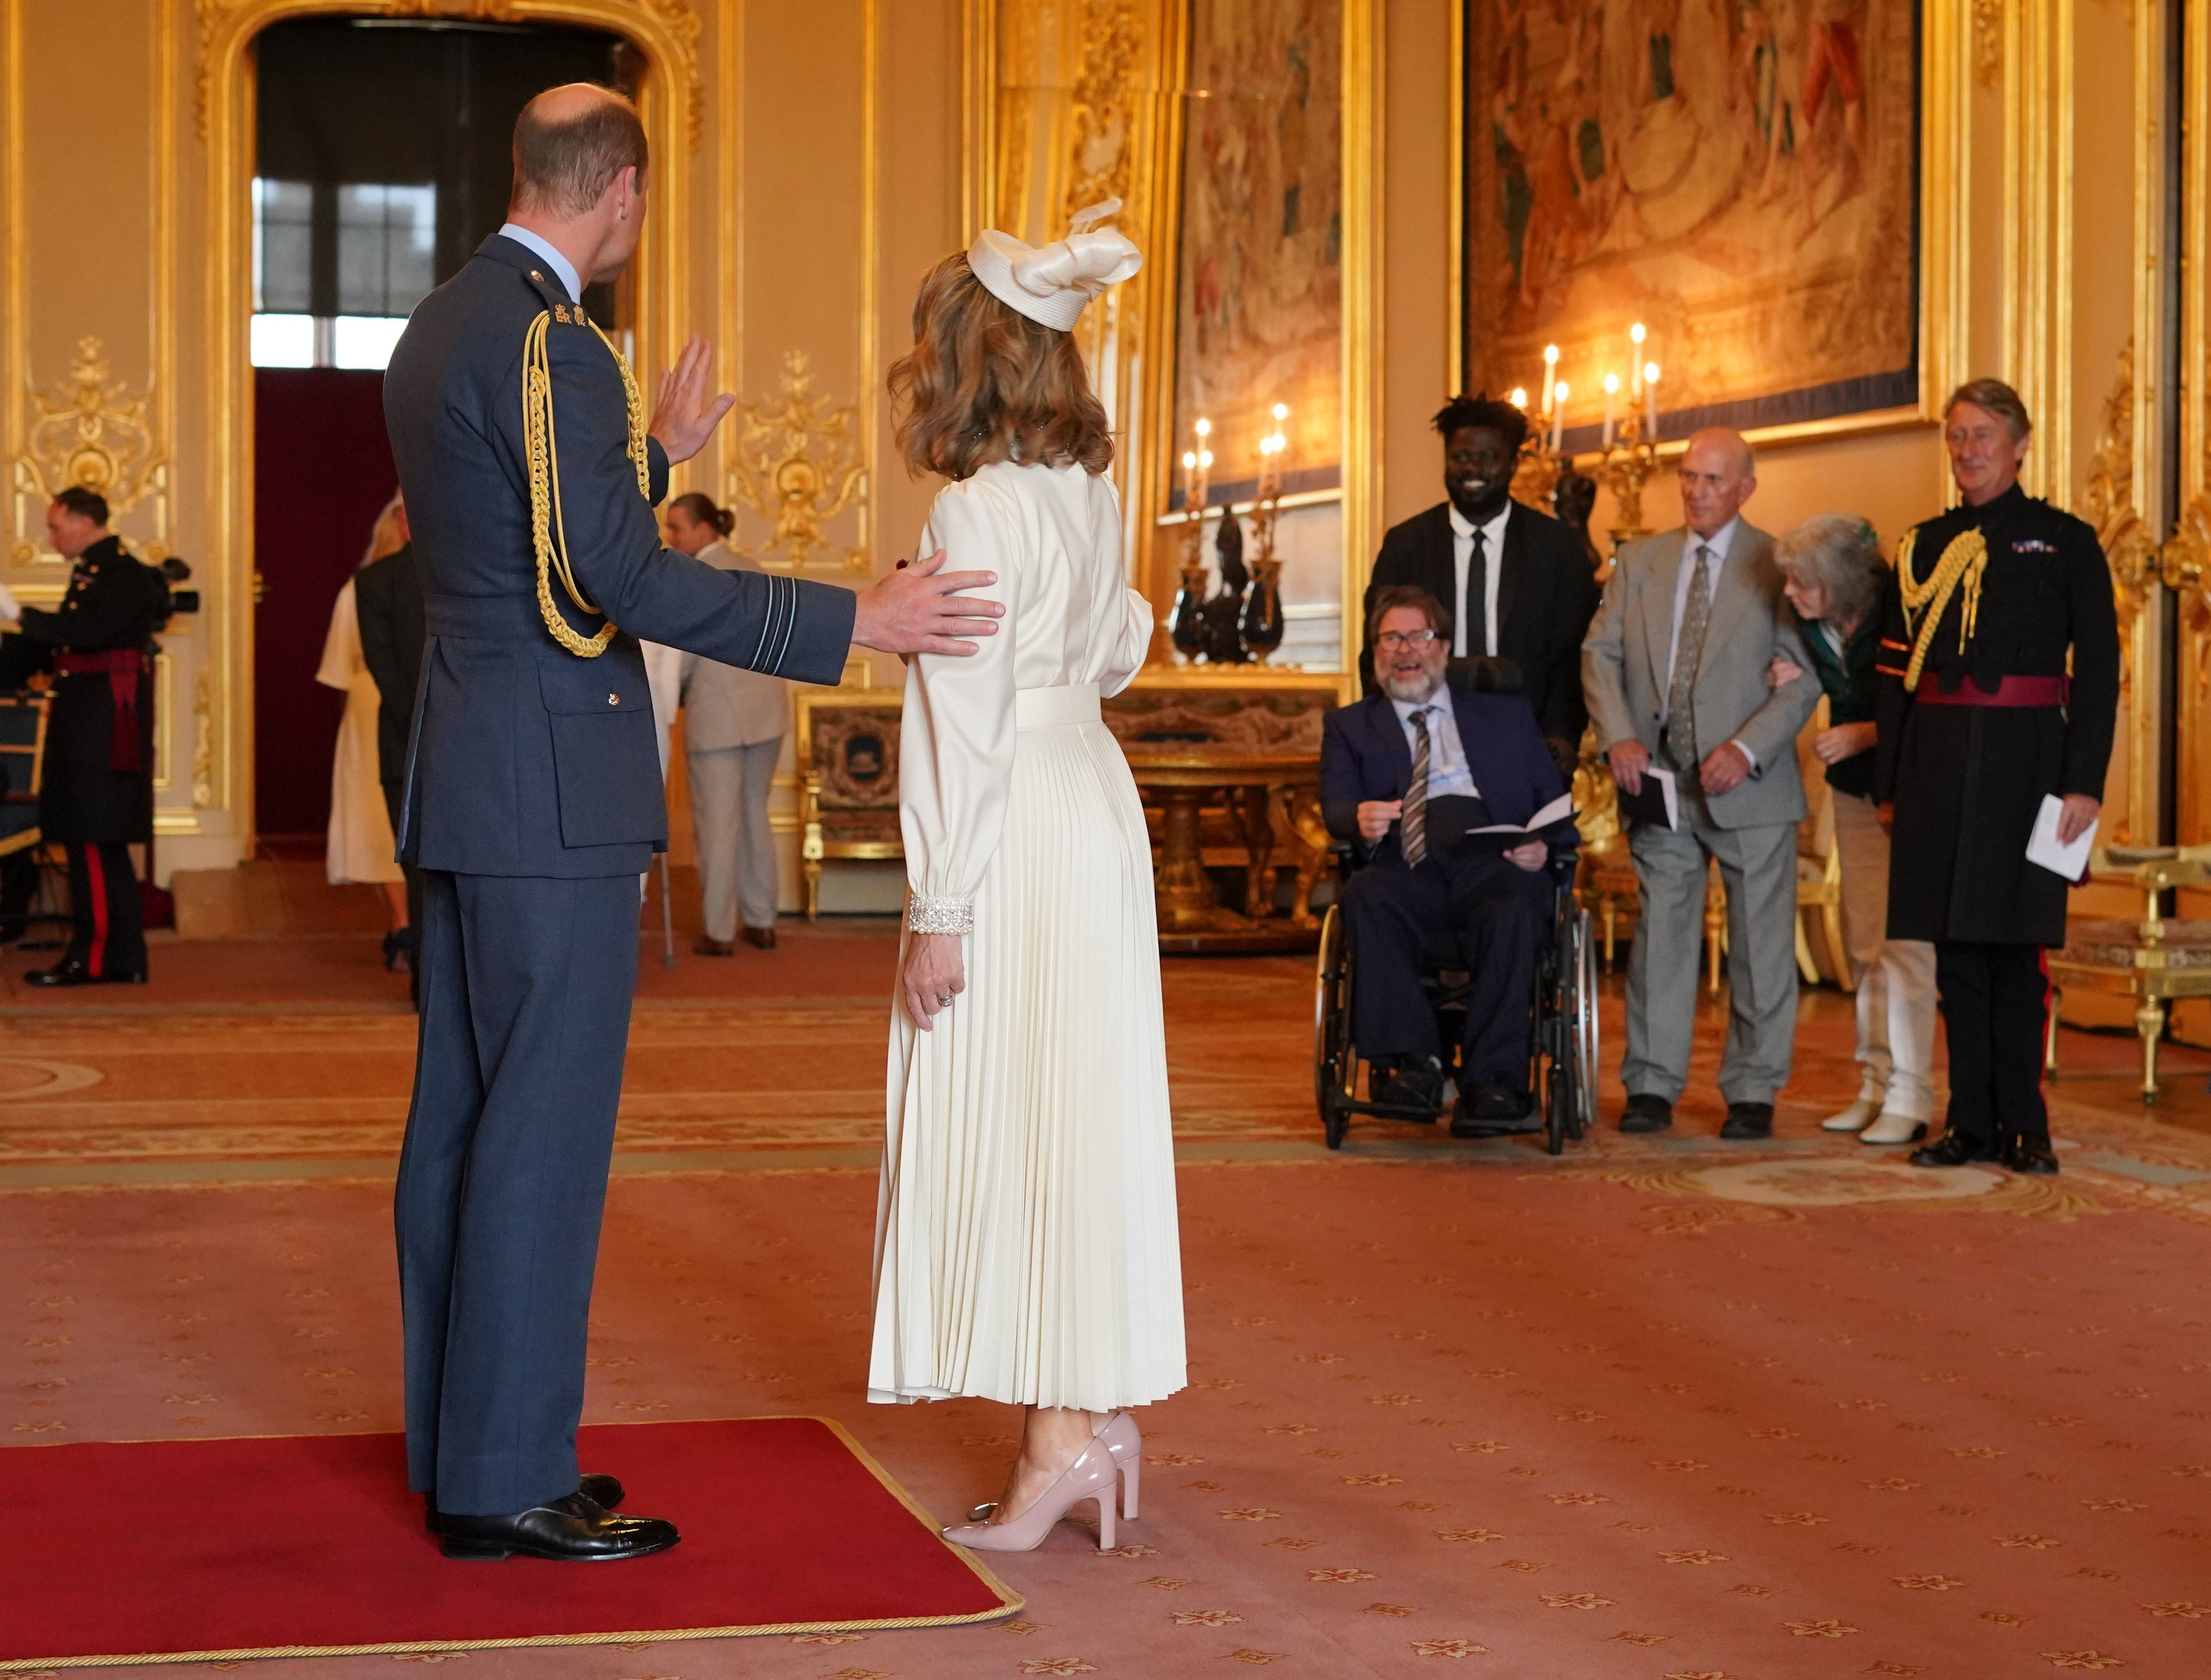 Kate Garraway is watched by her husband Derek Draper as she is made a Member of the Order of the British Empire by the Prince of Wales at Windsor Castle